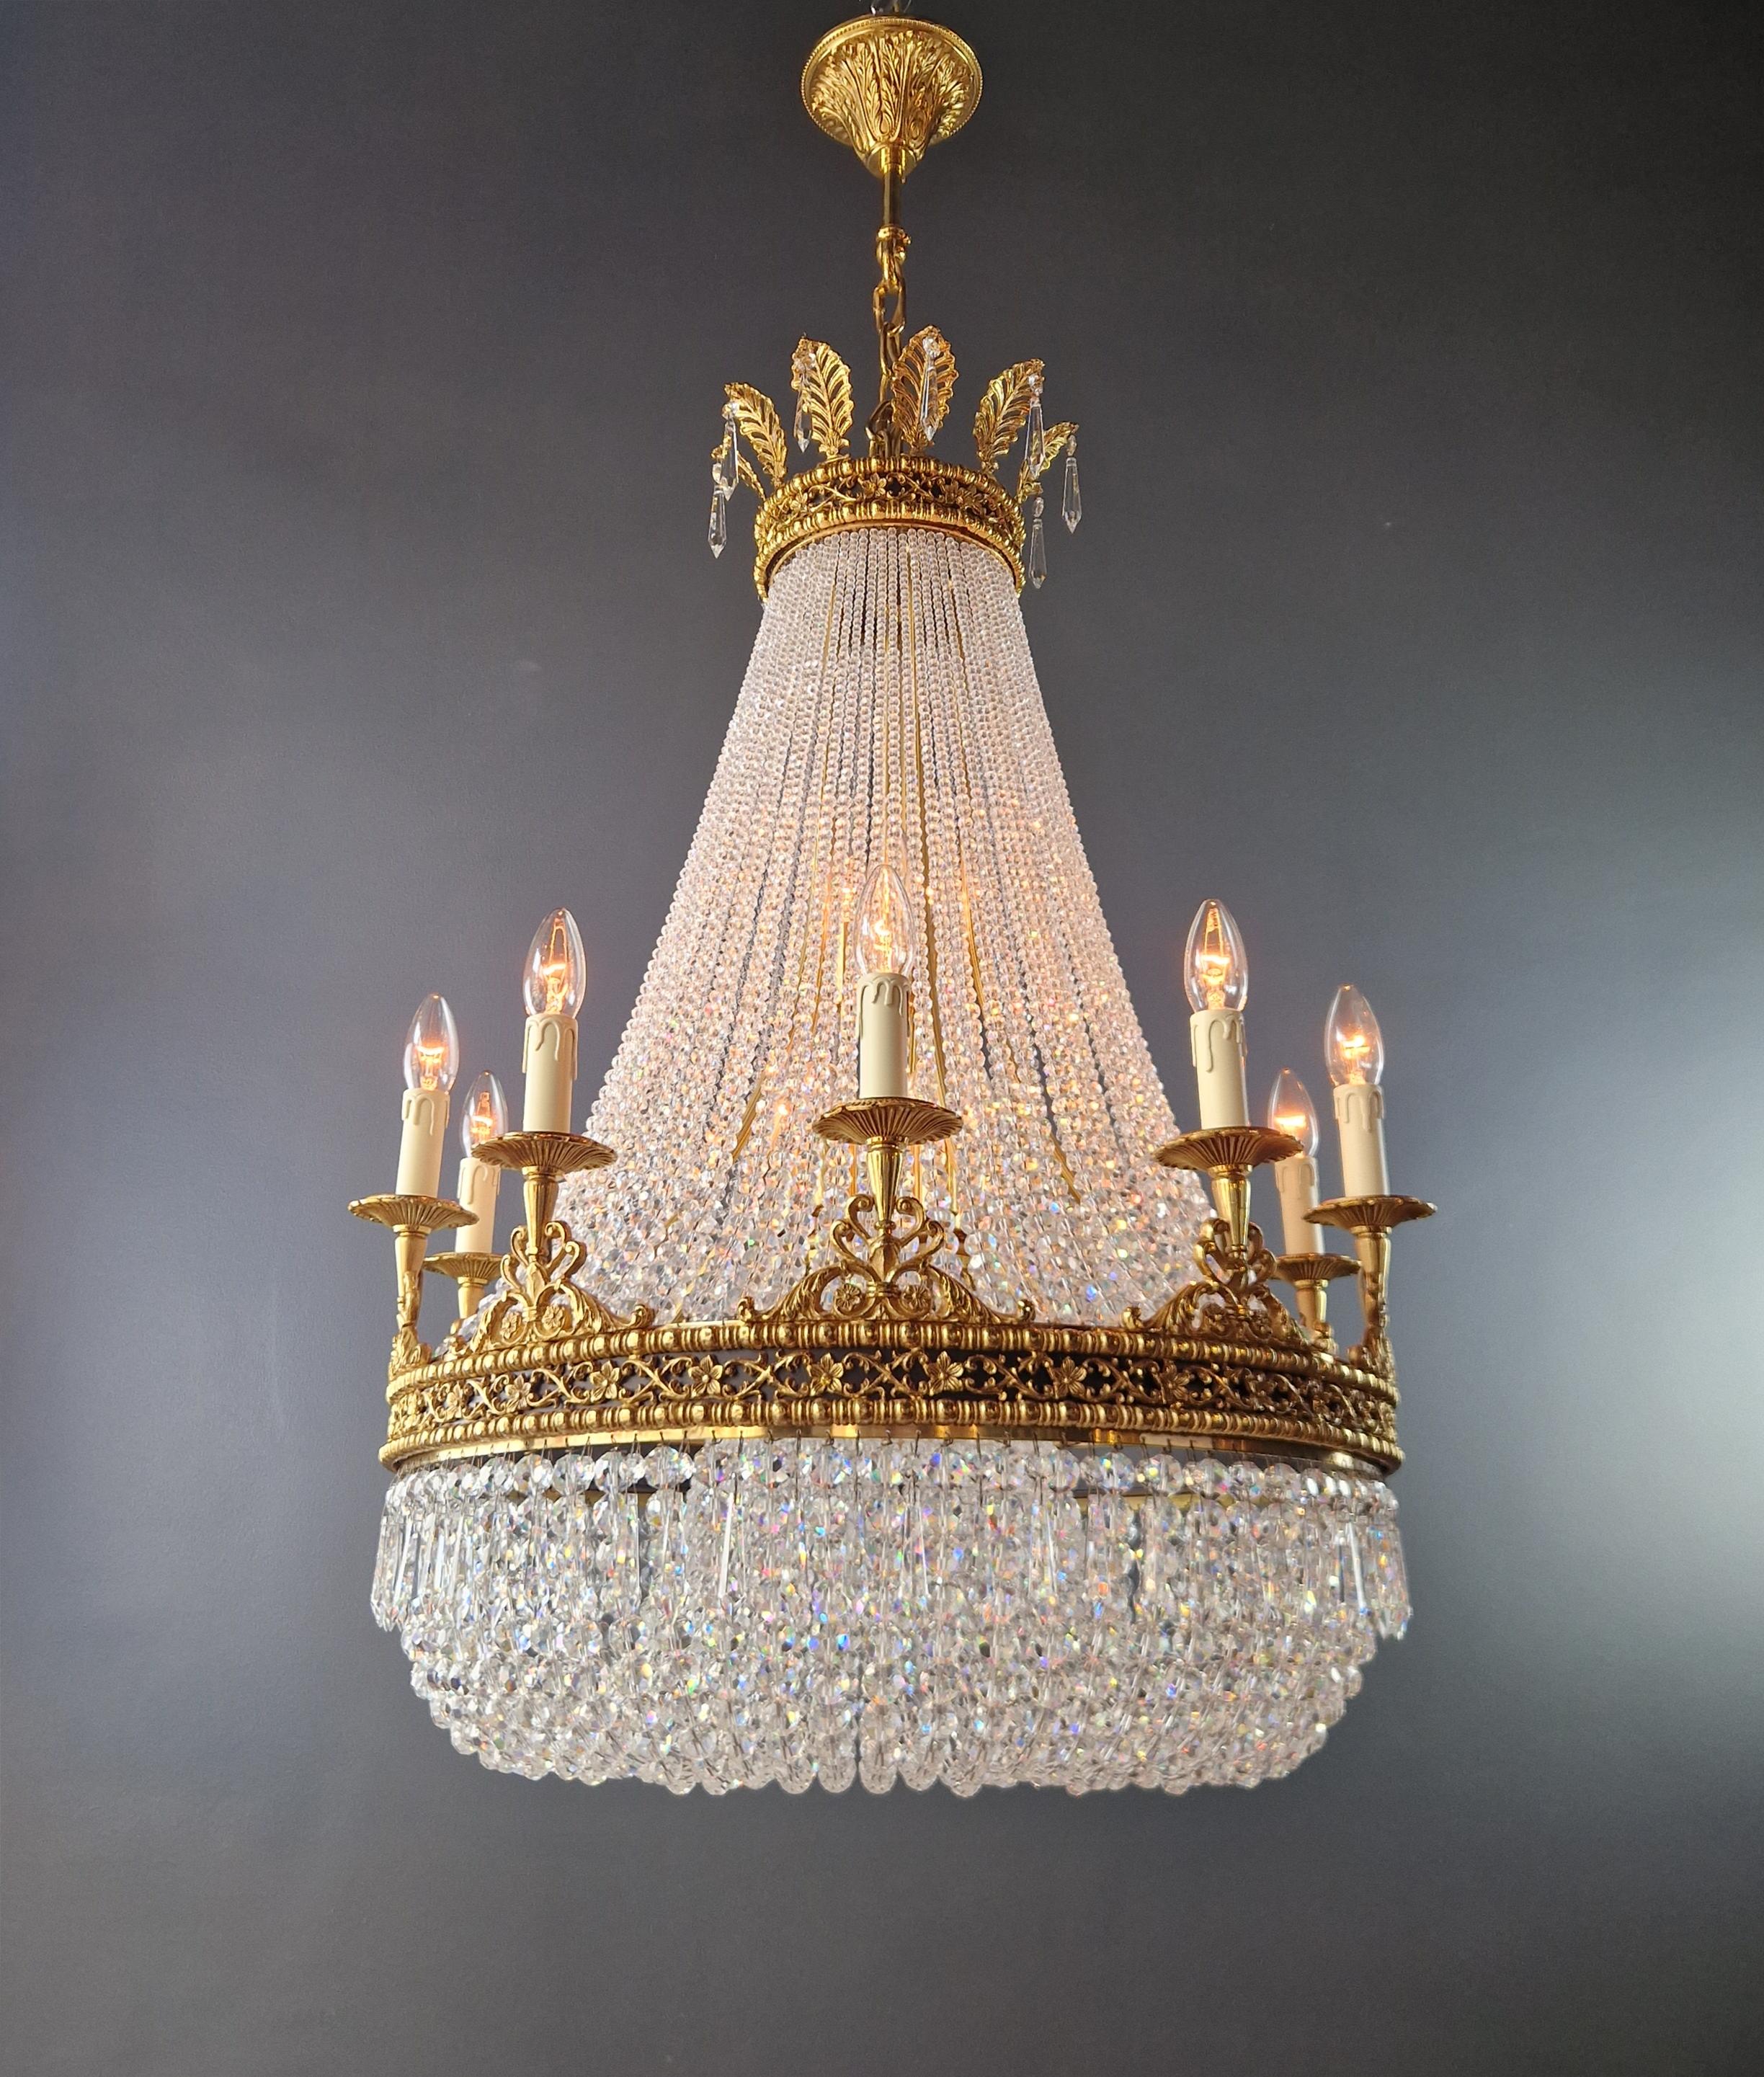 European Brass Basket Empire Sac a Pearl Chandelier Beaded Crystal Lustre Lamp Antique For Sale